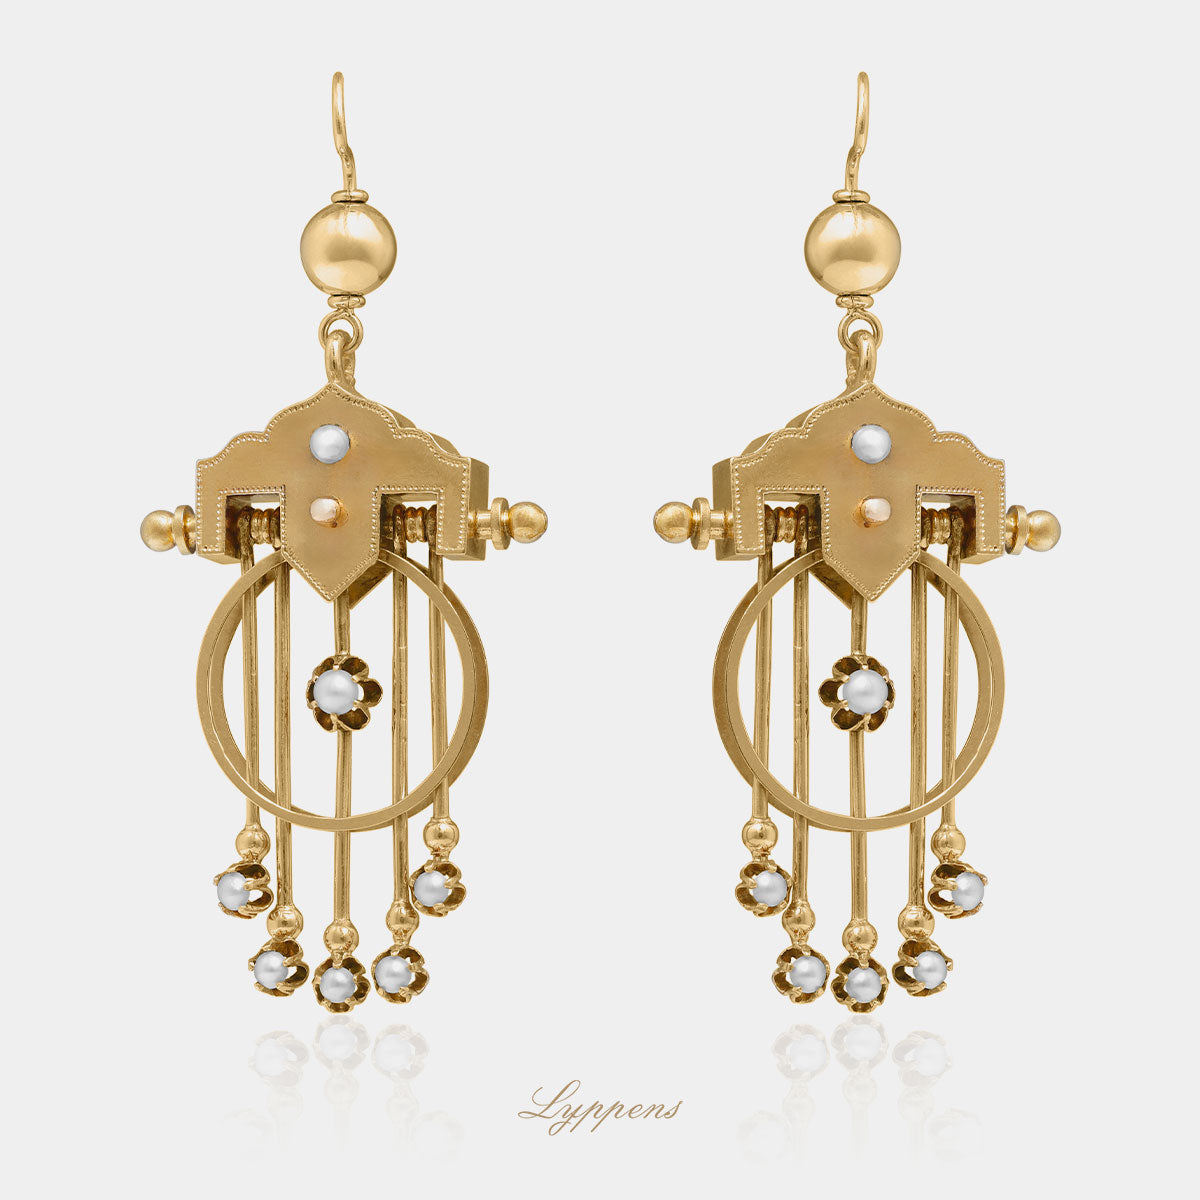 Yellow gold Victorian earrings with pearl